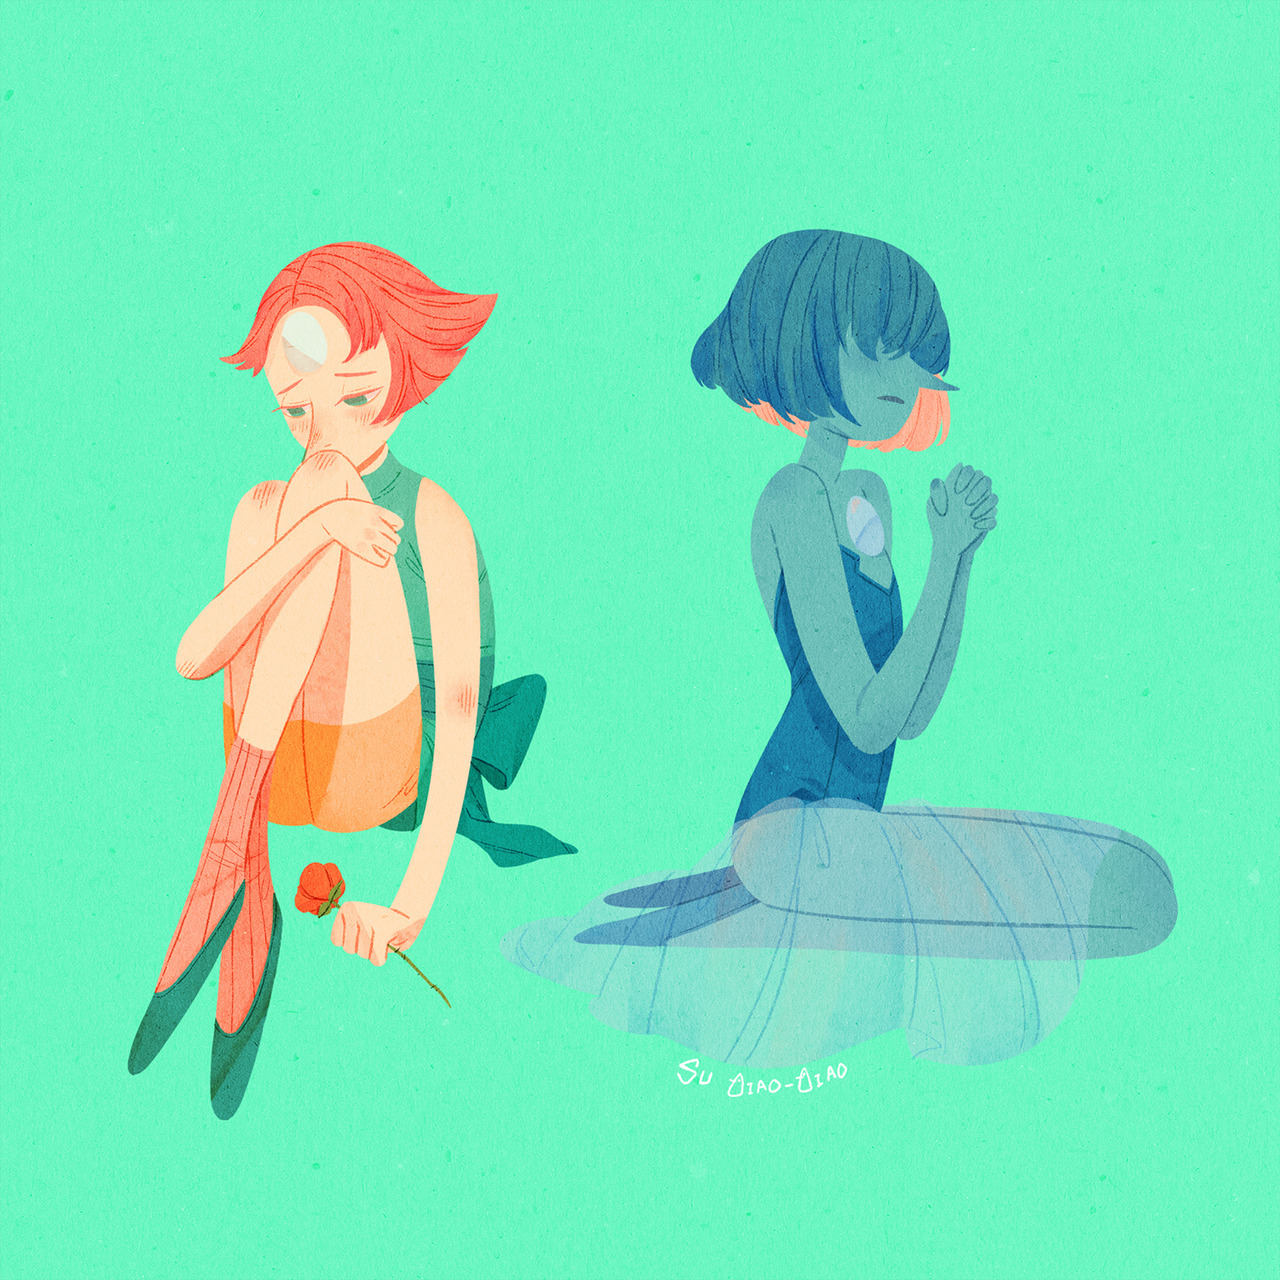 I haven’t watched this show in ages, but Pearl still makes me cry :/ Twitter: @su_qiaoqiao